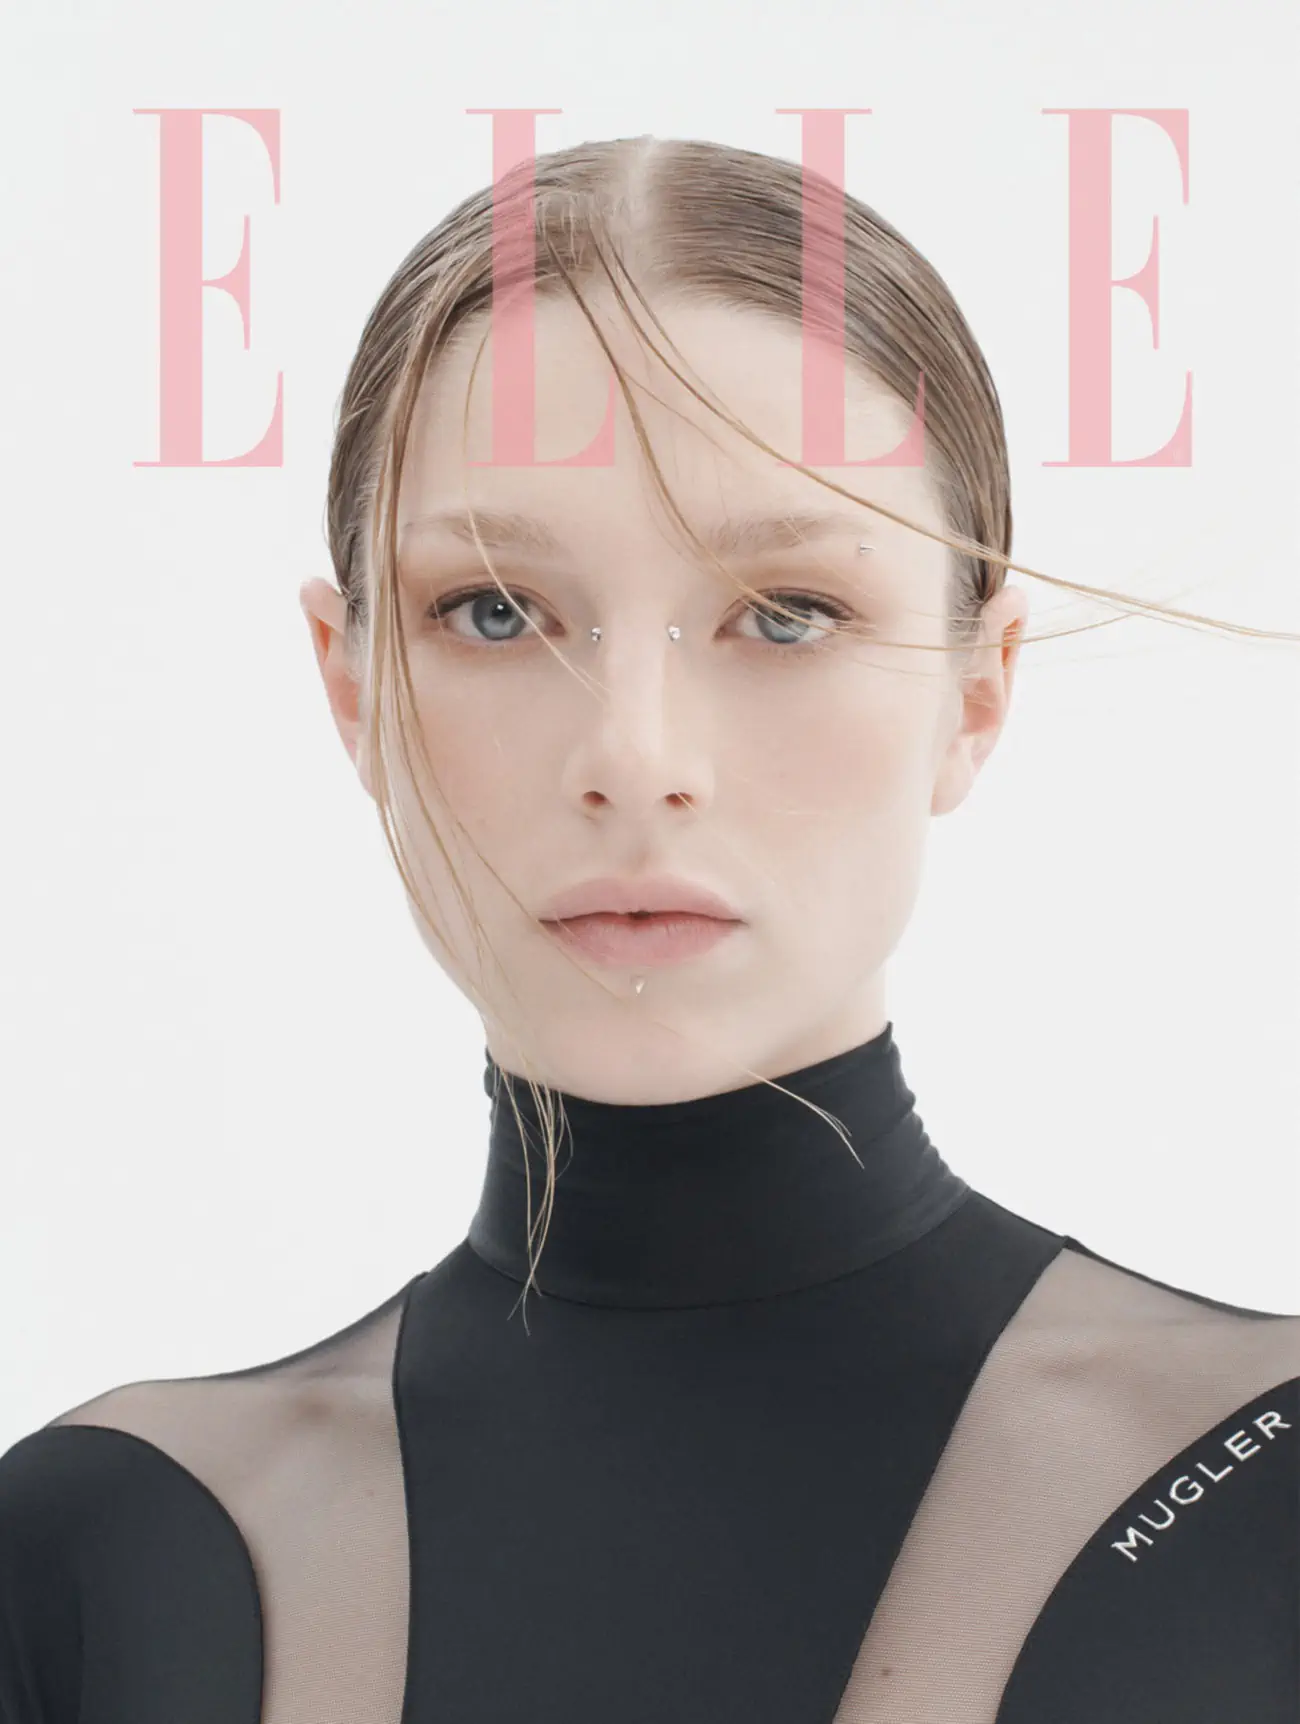 Hunter Schafer covers Elle UK April 2023 by Paola Kudacki